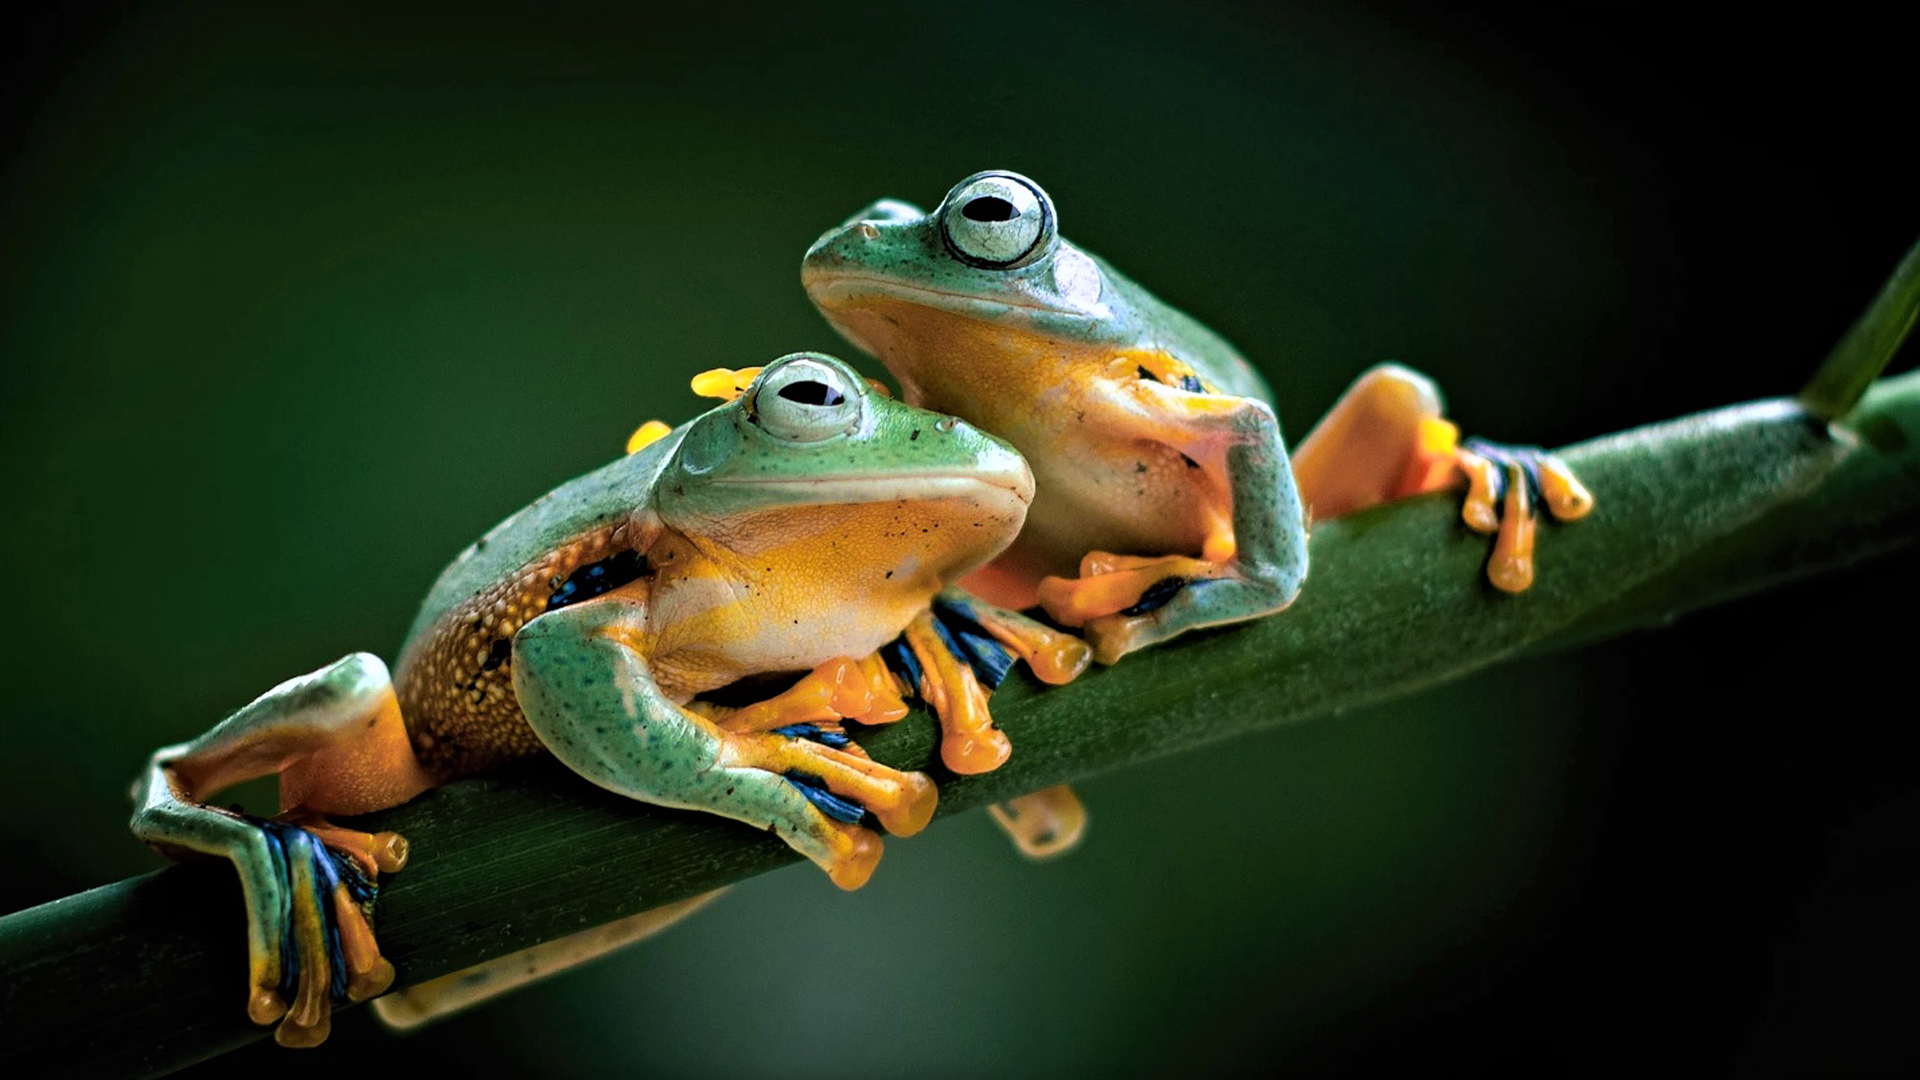 Two green frogs are sitting on a green branch